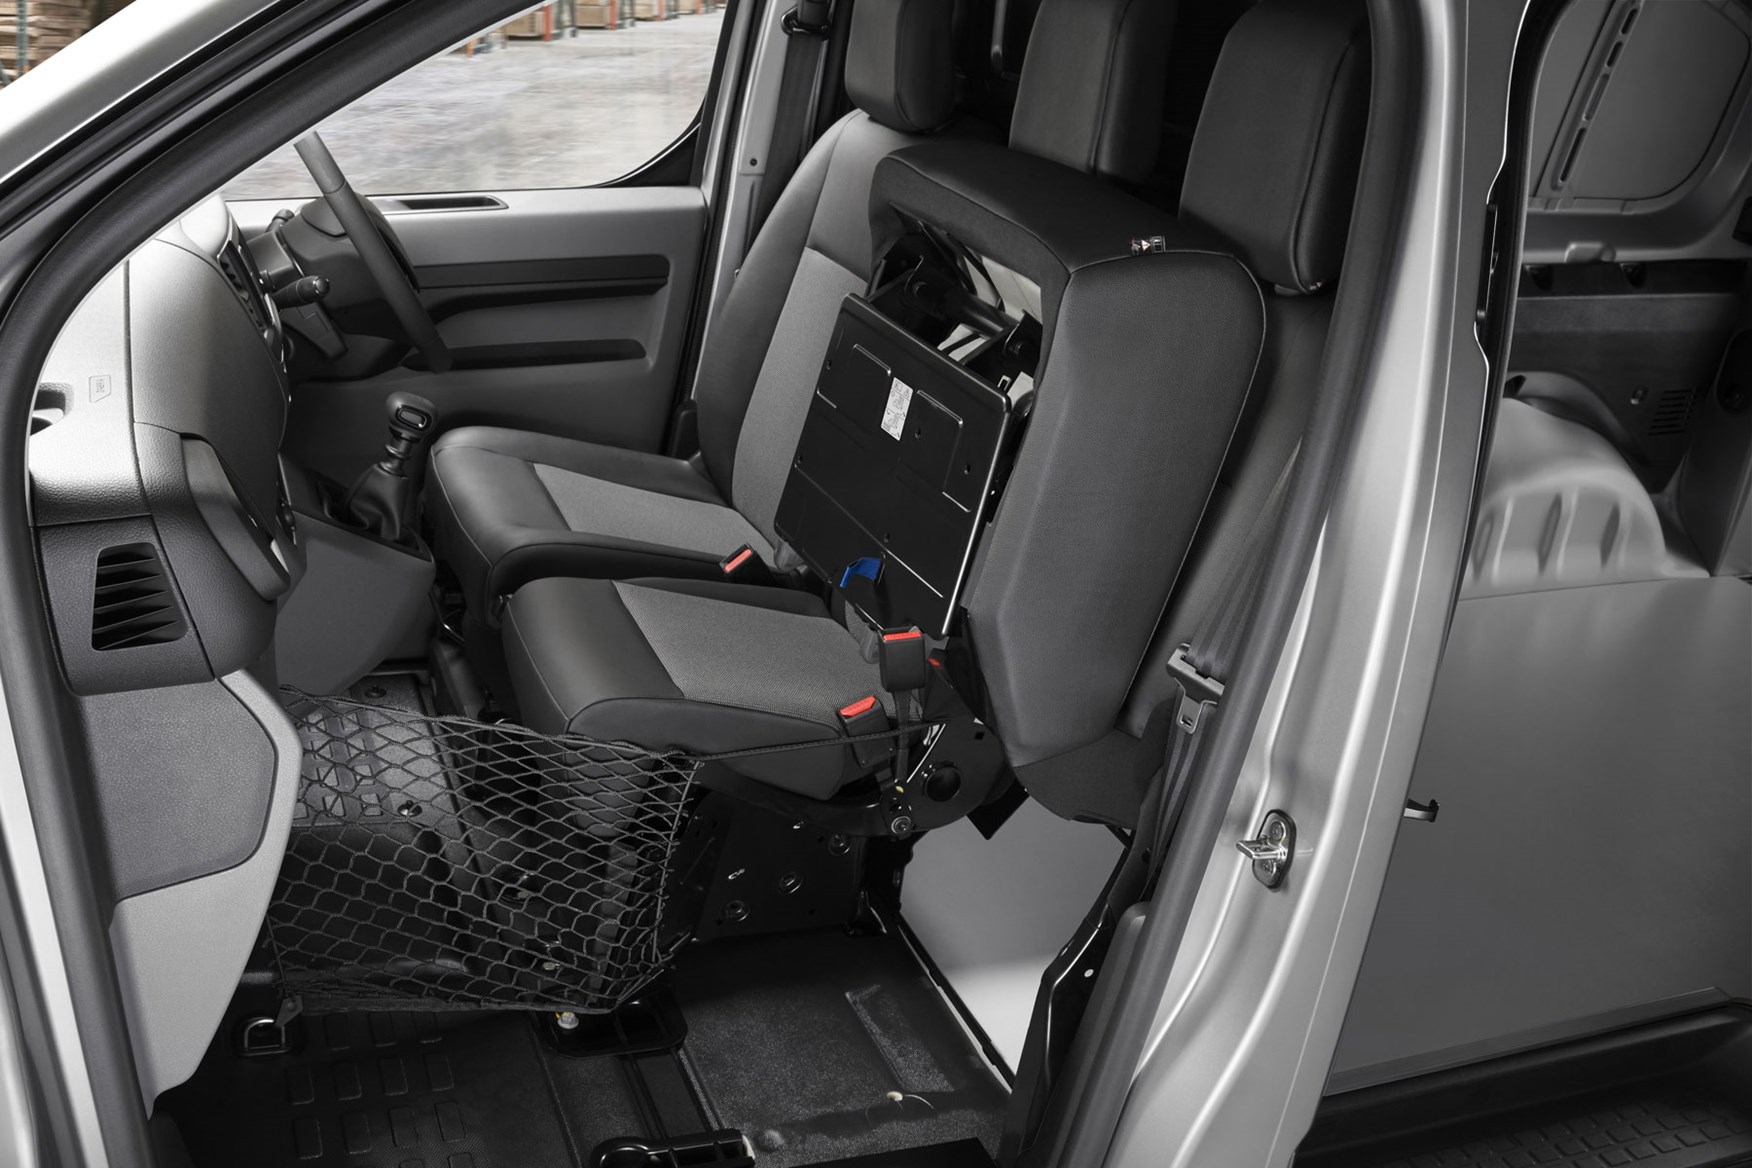 Peugeot Expert - 2016 model, cab interior viewed from passenger side, Moduwork bulkhead with passenger seat folded up and net fitted